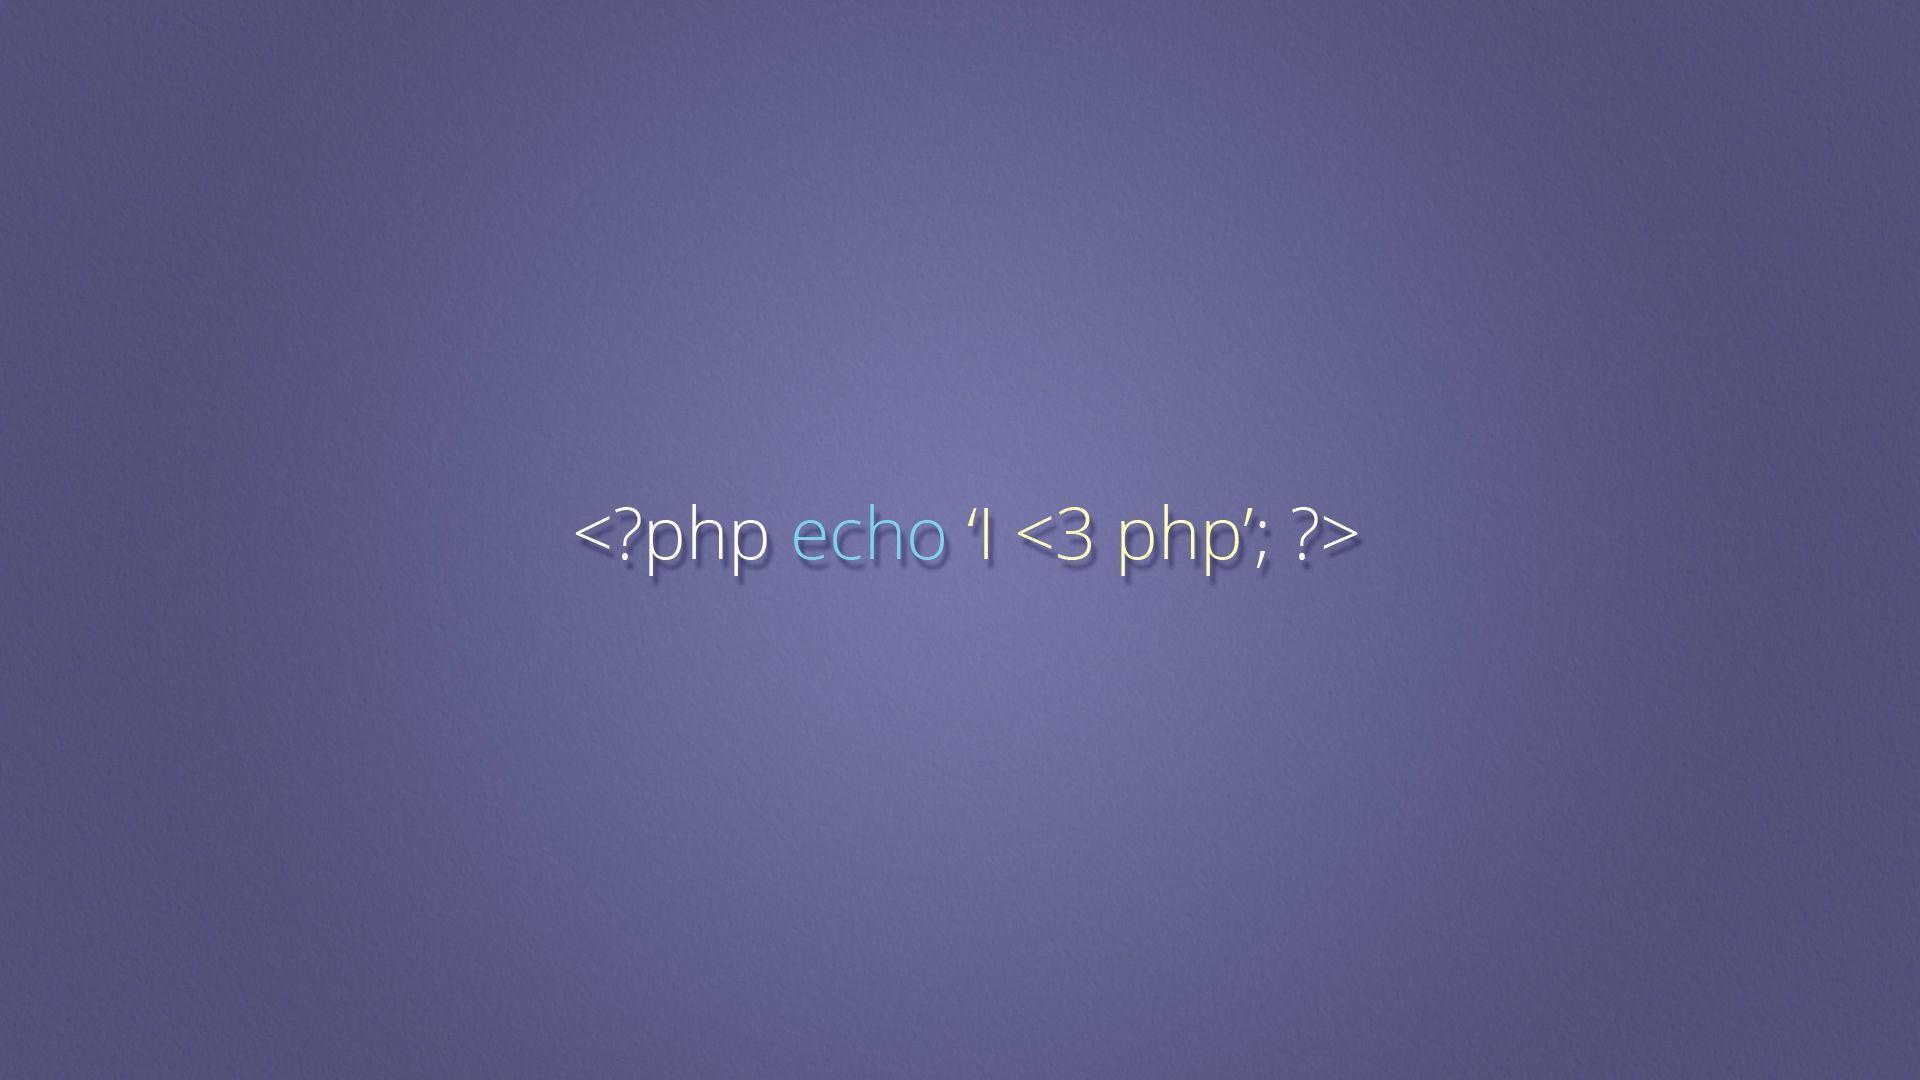 Php Programmer Wallpapers